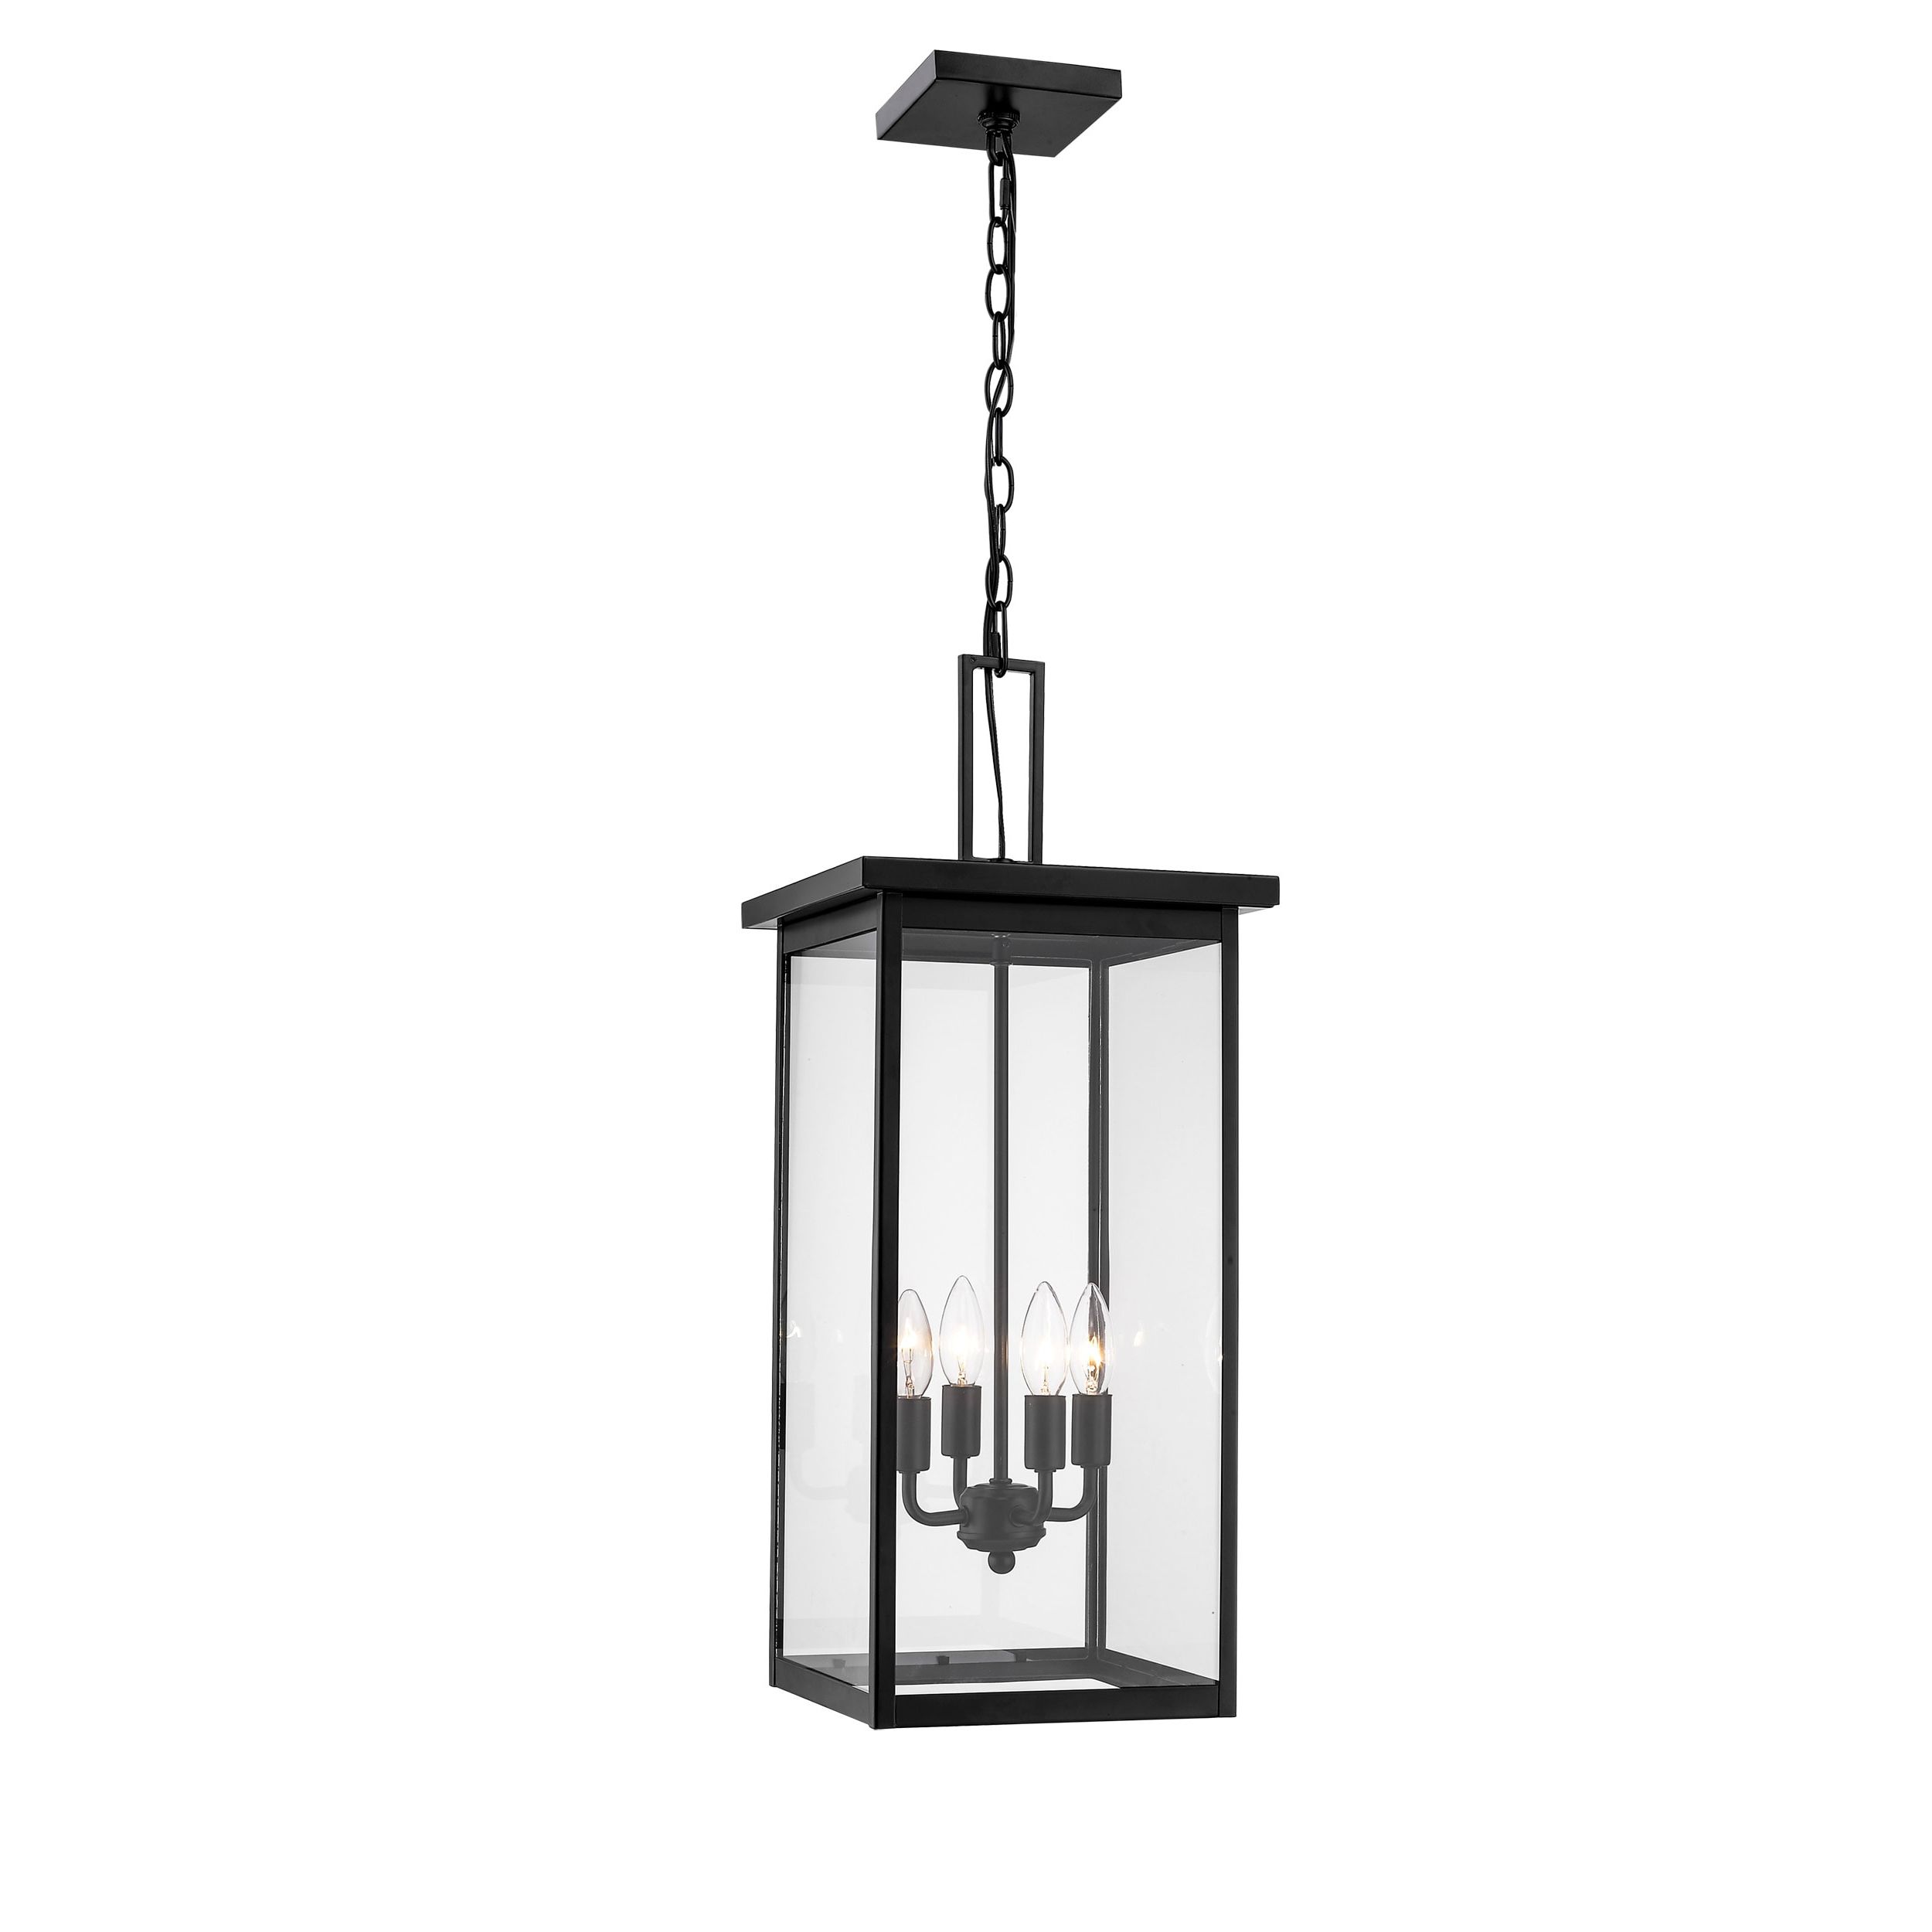 Black Powder Coat Lantern Chandeliers With Well Liked Millennium Lighting Barkeley 4 Light Powder Coat Black Transitional Clear  Glass Lantern Outdoor Pendant Light In The Pendant Lighting Department At  Lowes (View 2 of 10)